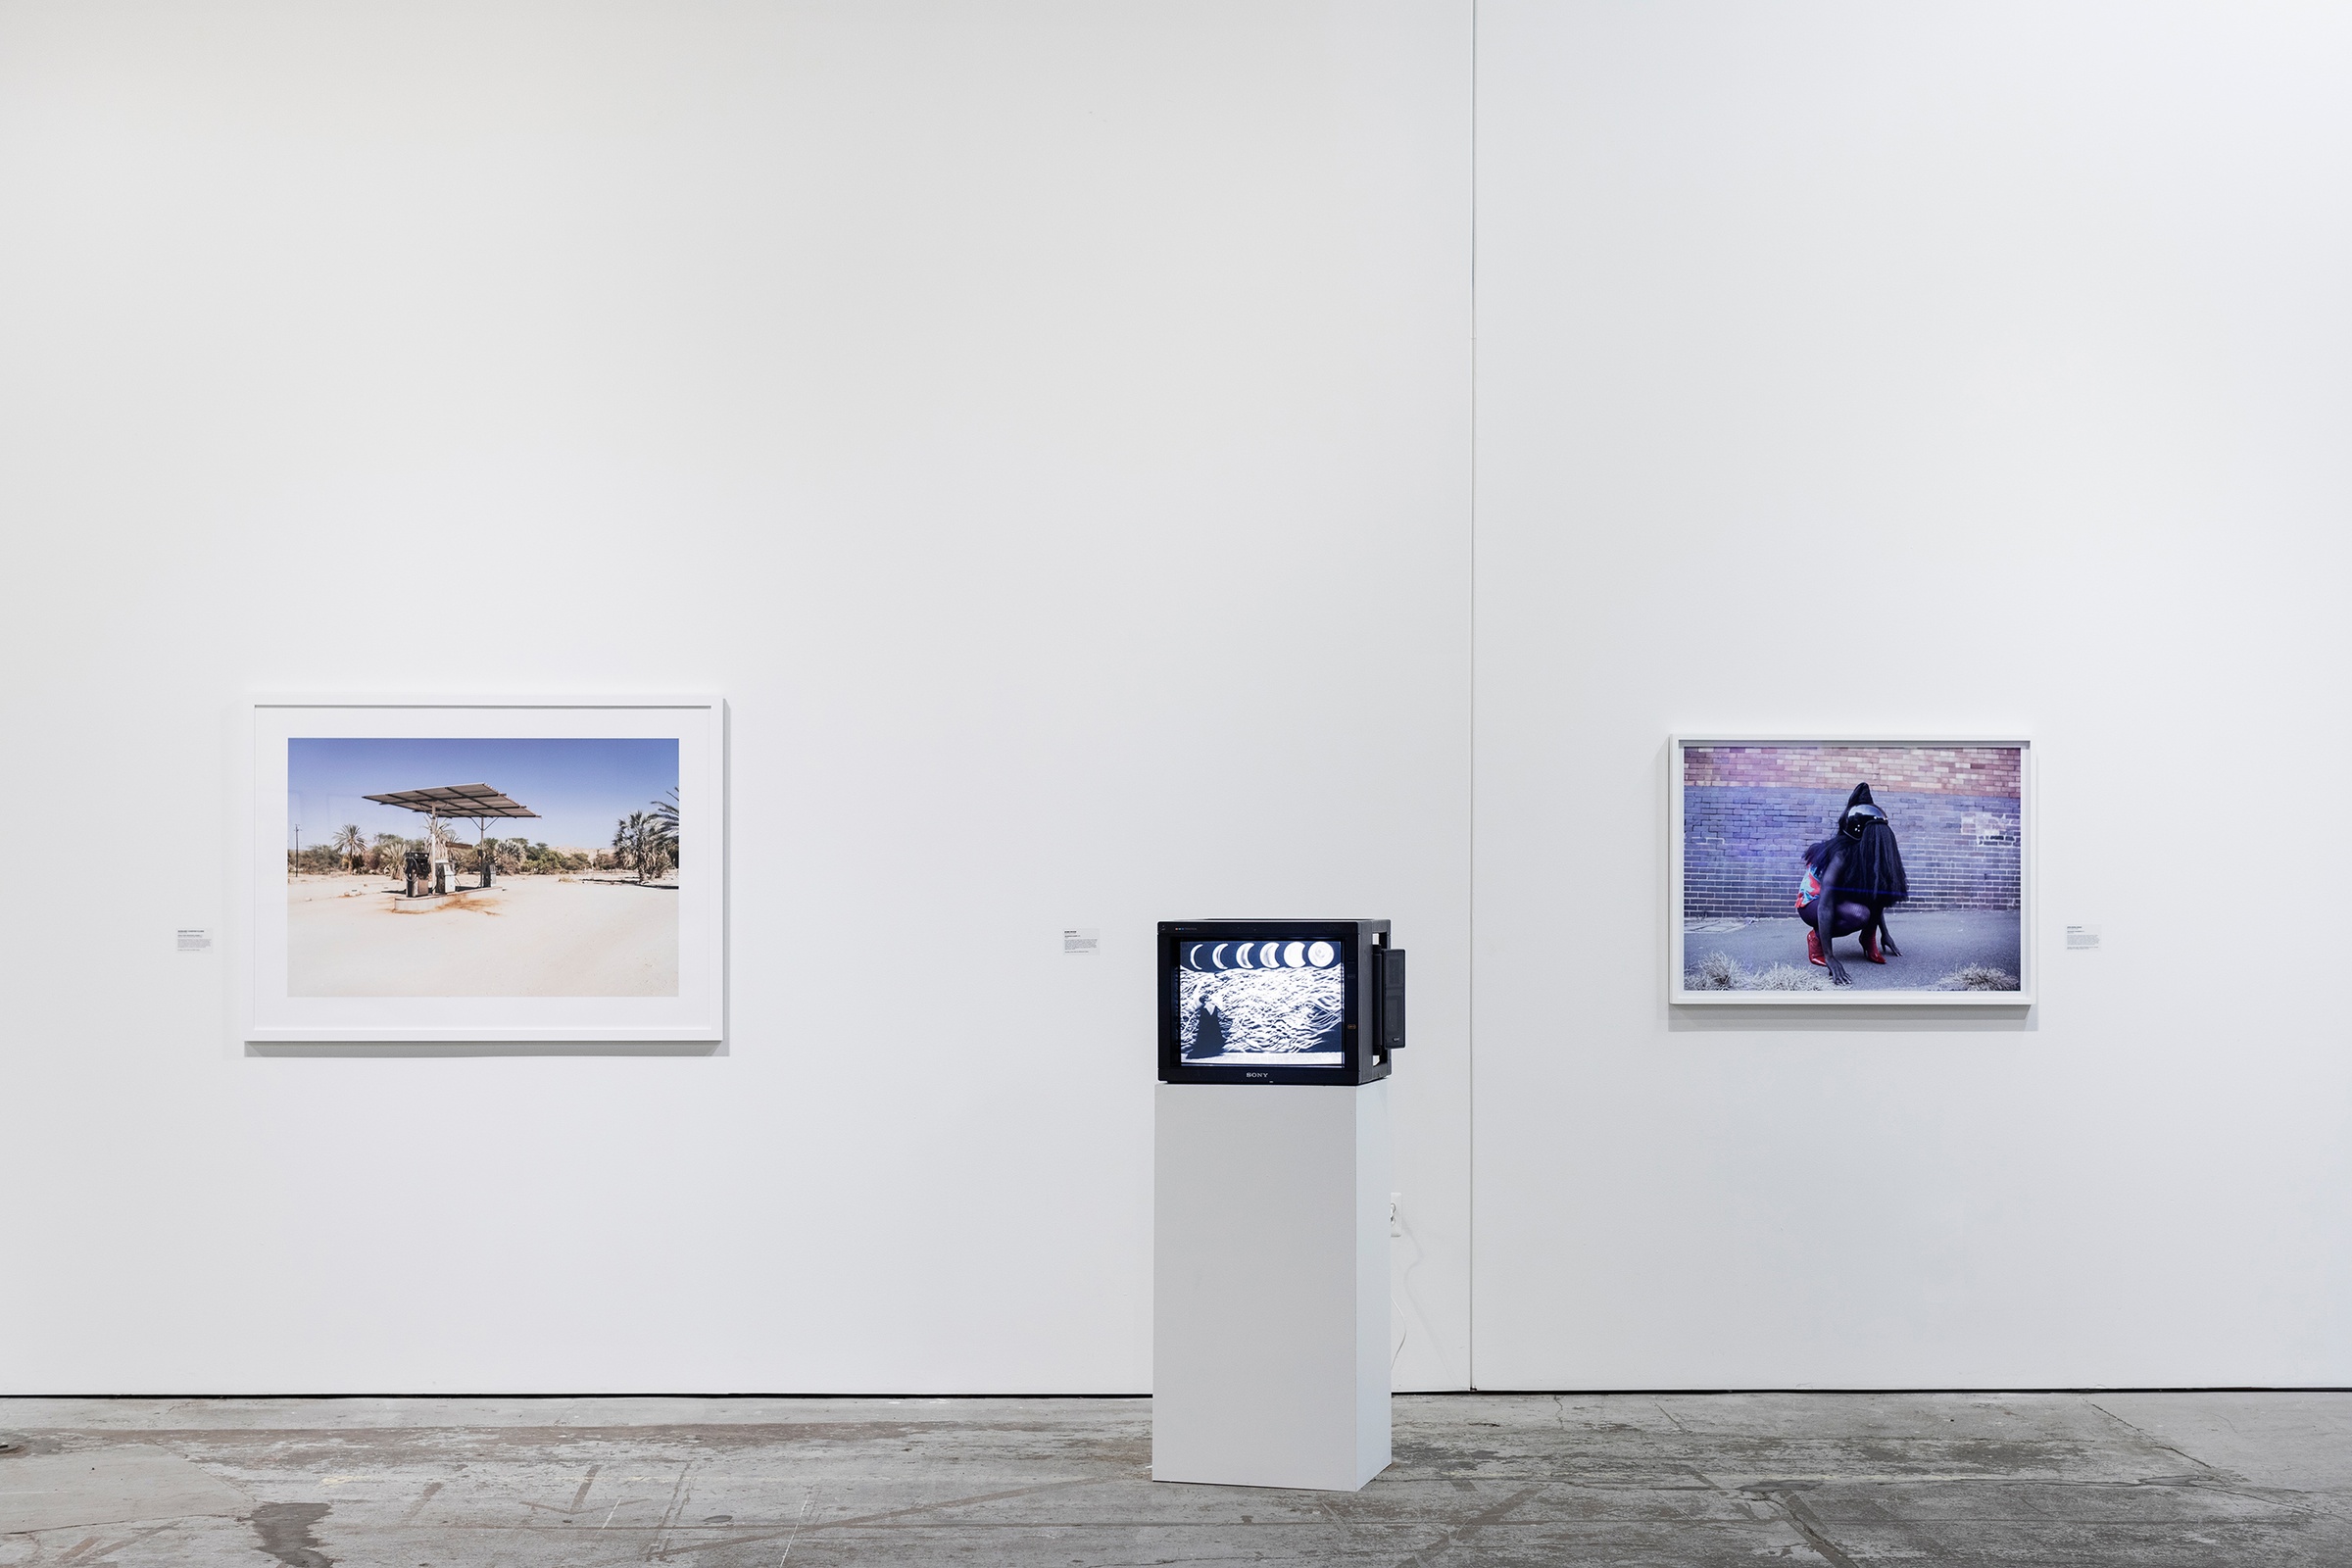 Installation photograph from ‘Crossing Night: Regional Identities x Global Context’ exhibition at the Museum of Contemporary Art Detroit. On the left, Margaret Courtney Clarke’s photograph ‘Petrol Pump, Sesfontein, Namibia’ is mounted on the wall. In the middle, Robin Rhode’s video ‘The Moon is Asleep’ is displayed on a screen sitting on a plinth. On the right, Athi-Patra Riga’s photograph ‘The Naivety of Beiruth’ is mounted on the gallery wall.
